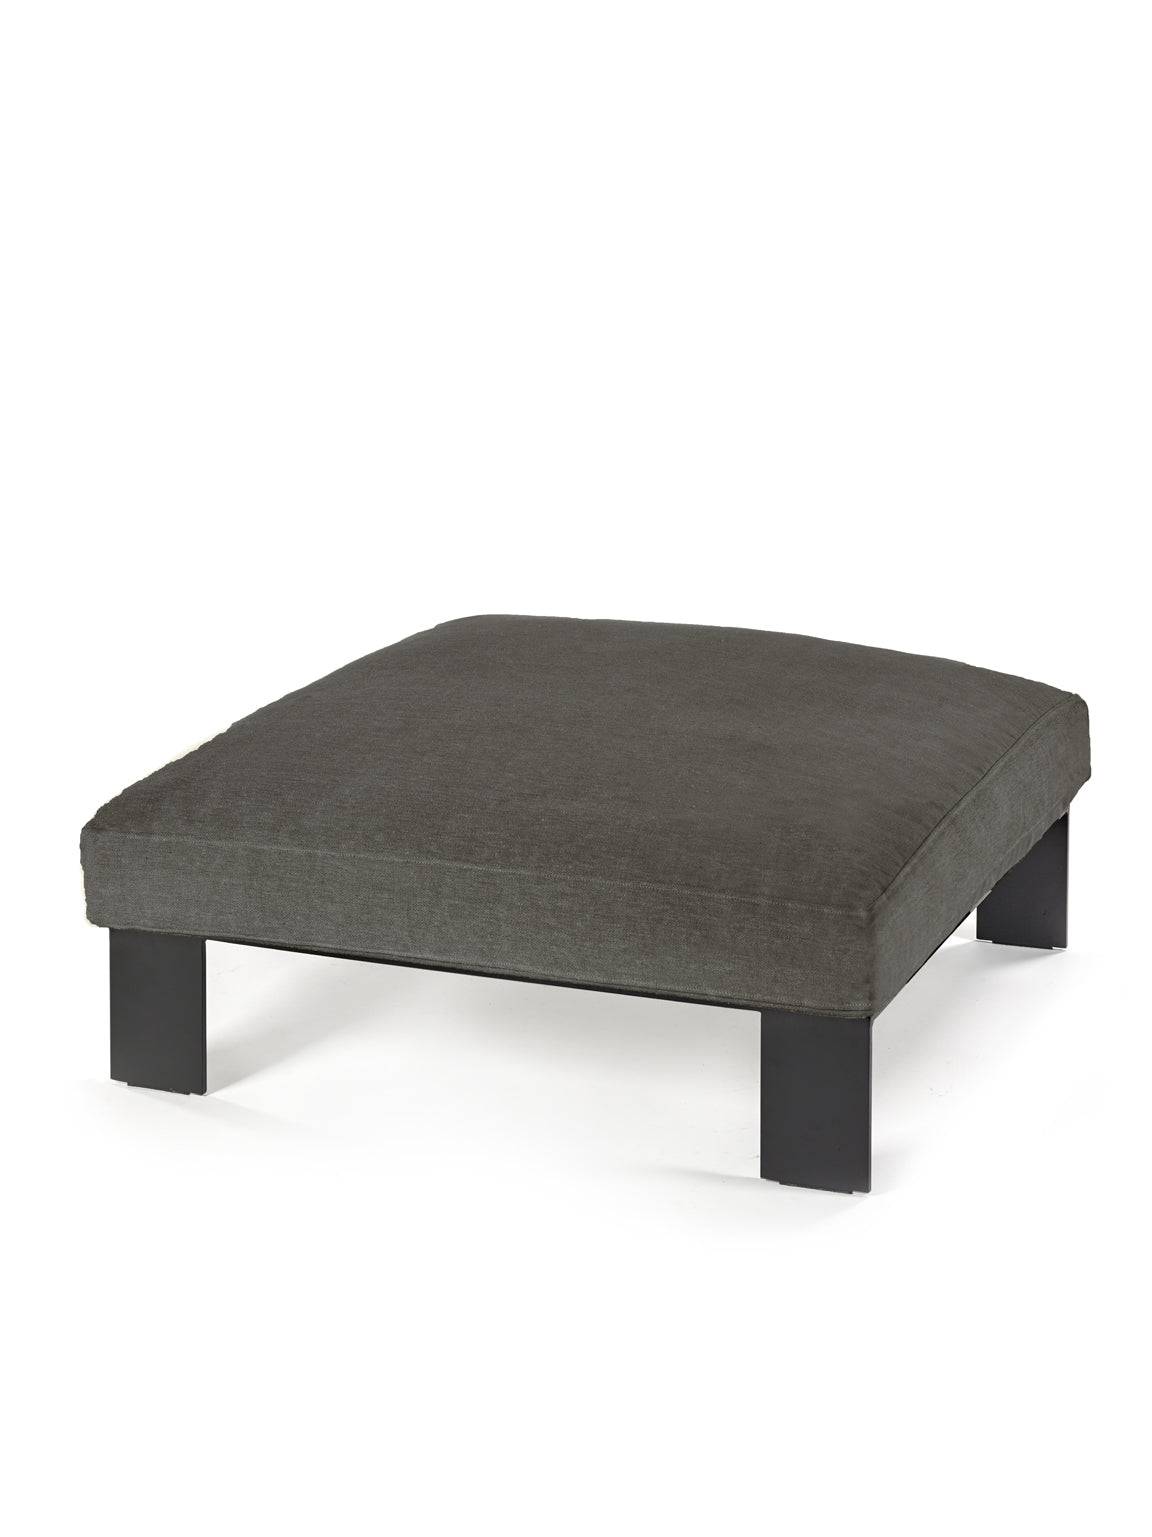 Mombaers Ottoman - Charcoal - THAT COOL LIVING